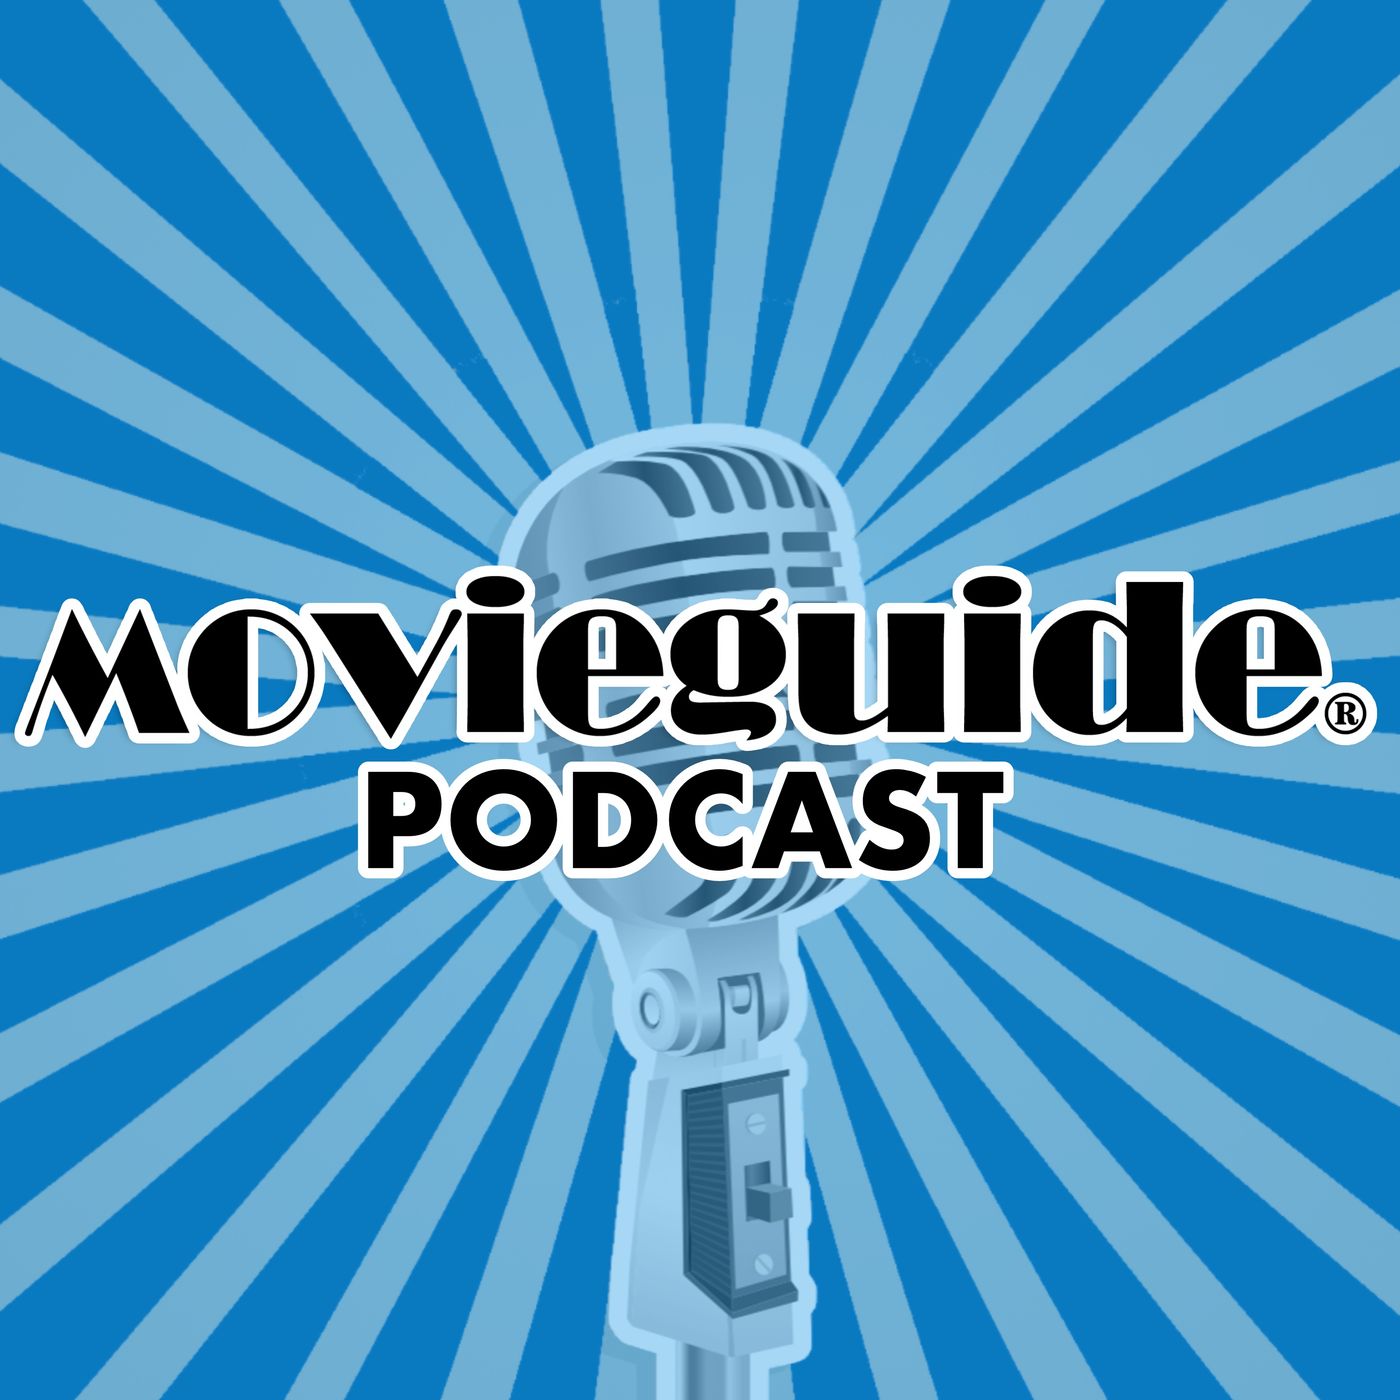 The Movieguide® Podcast